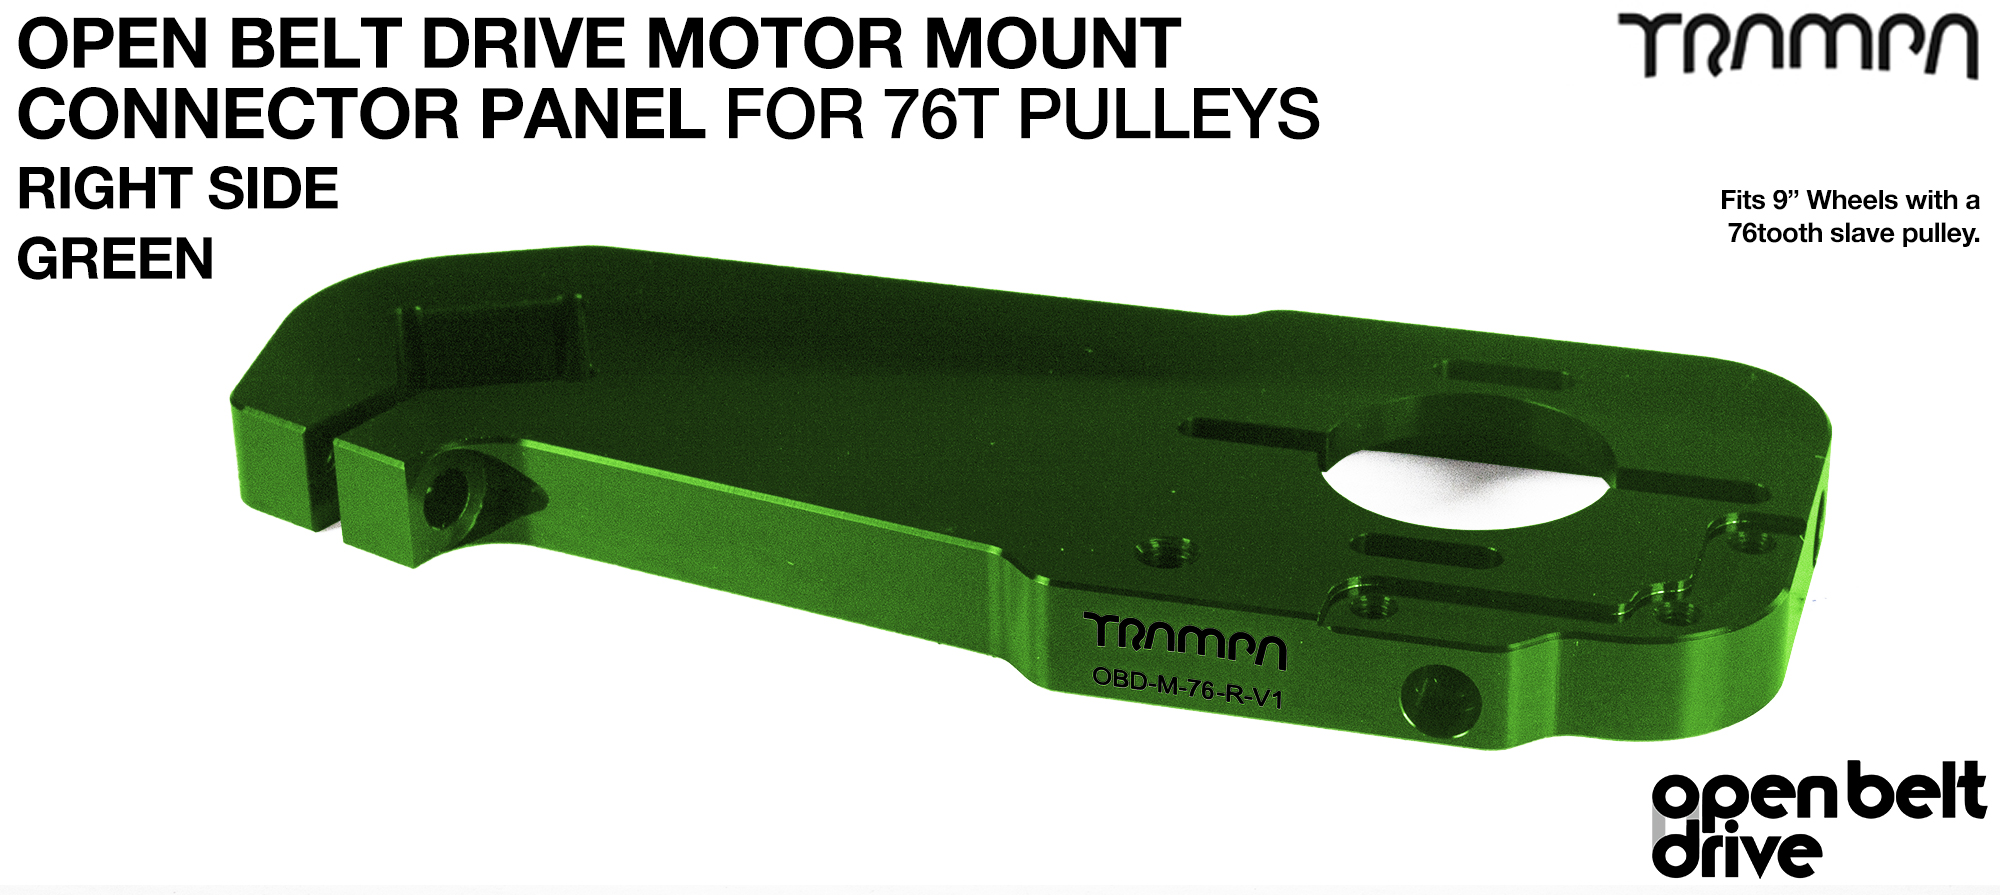 OBD Motor Mount Connector Panel for 76 tooth Pulleys - GOOFY - GREEN